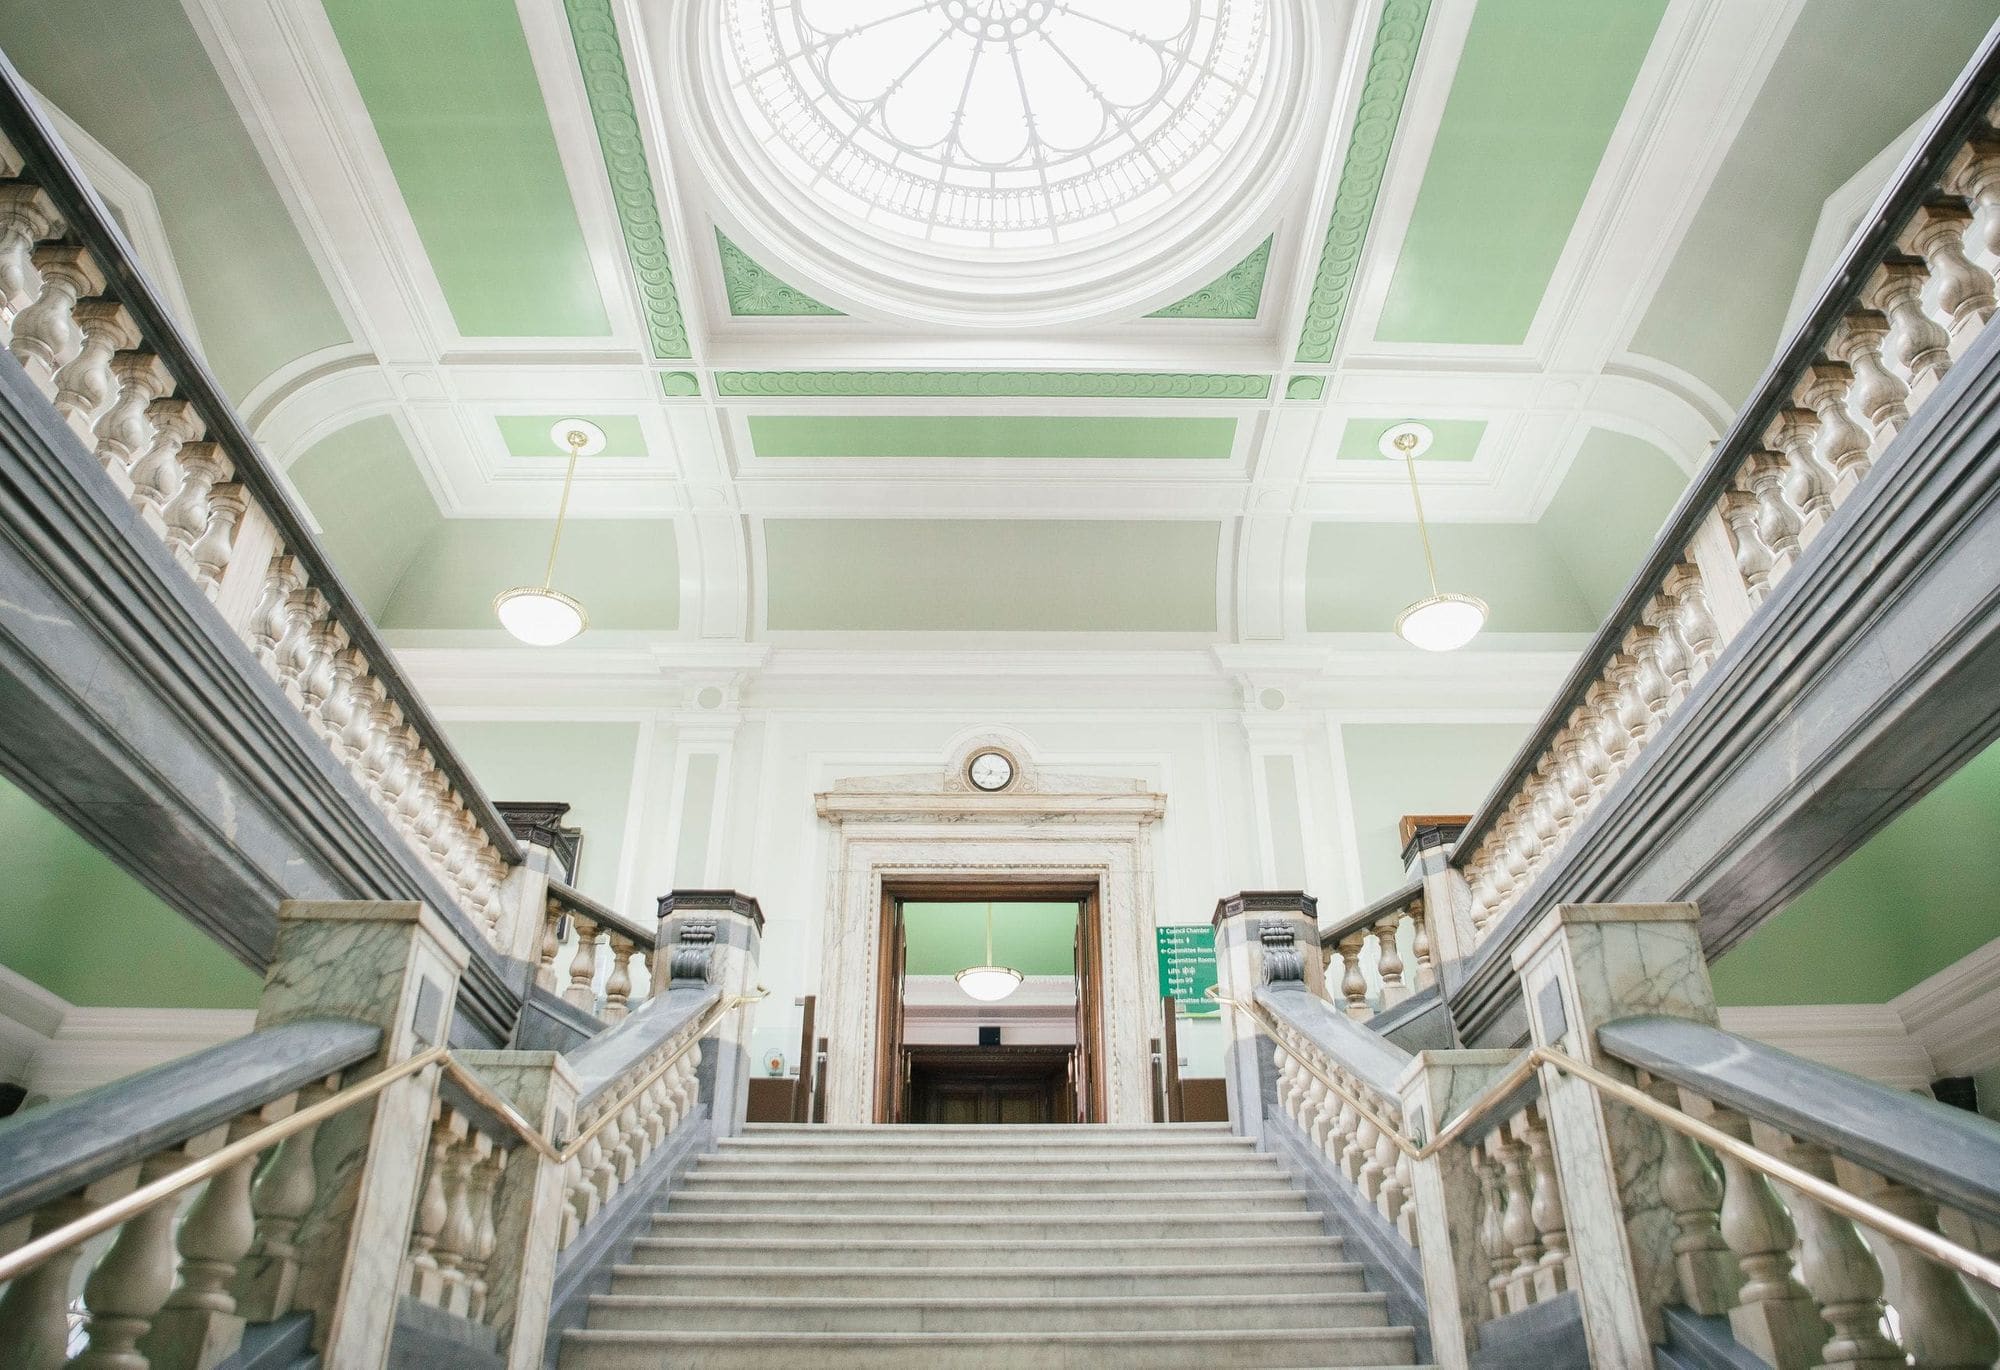 The best London register offices for your ceremony - Islington Town Hall